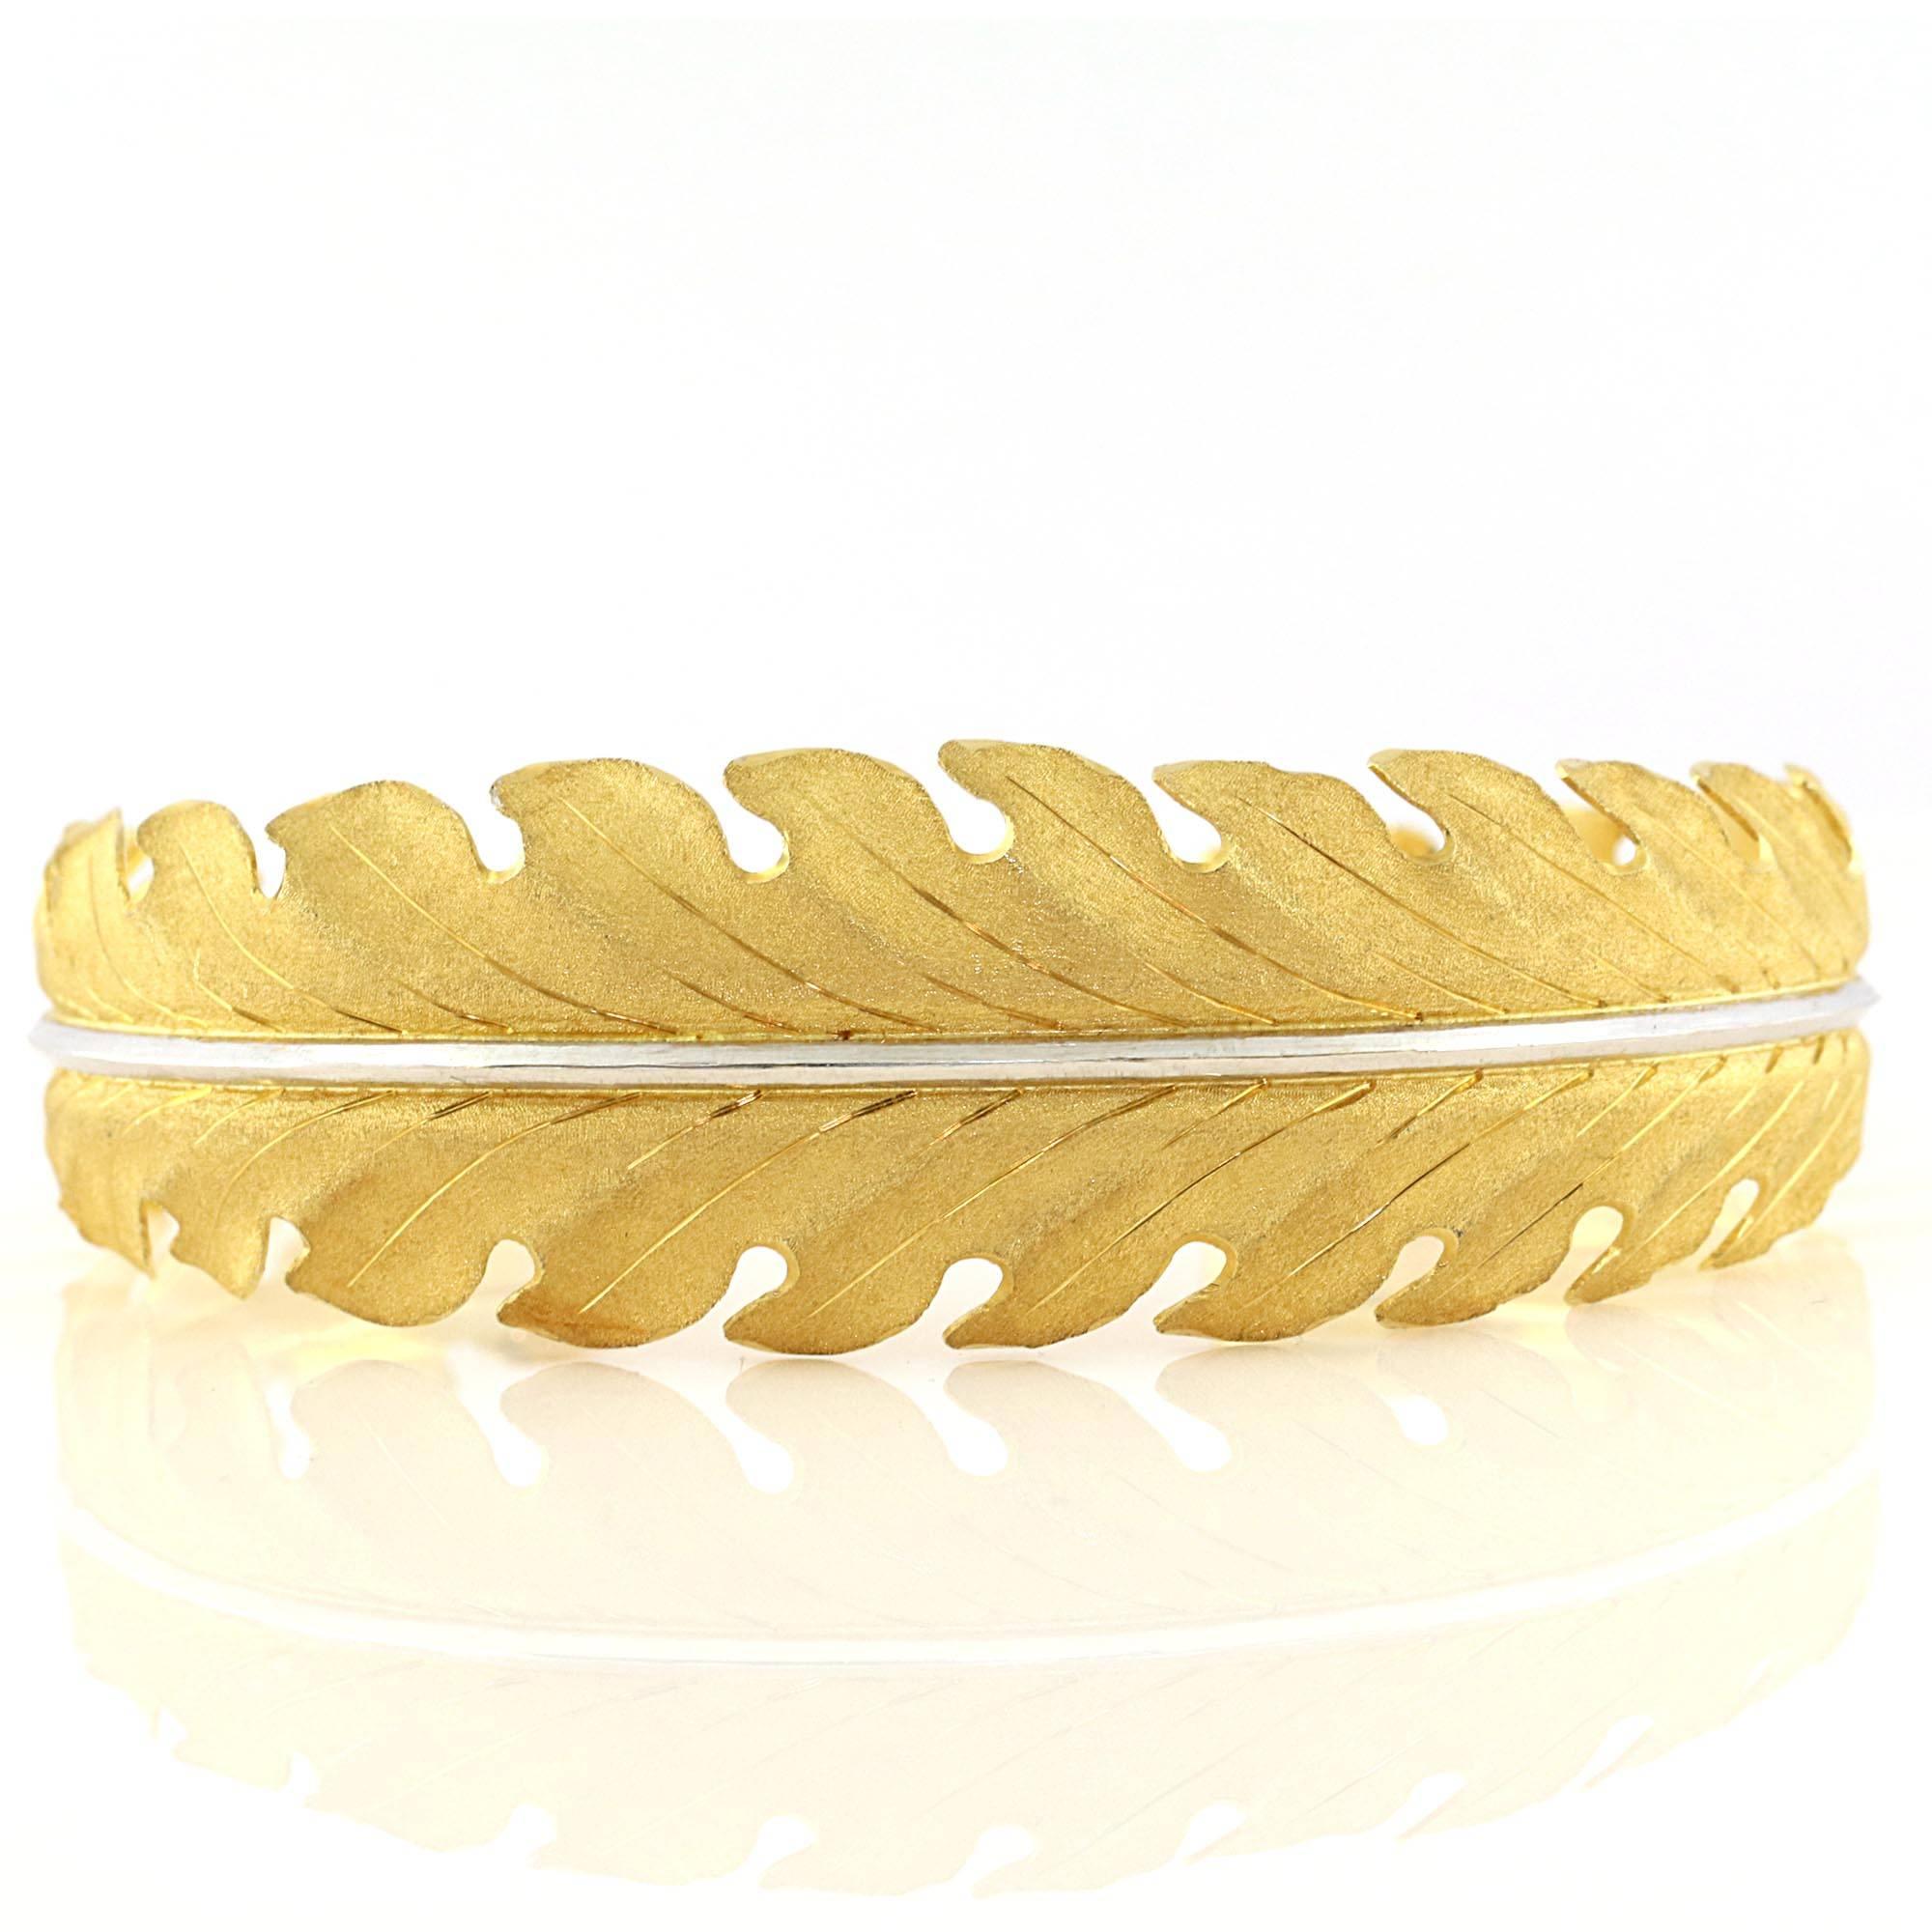 Open bottom Buccellati yellow gold leaf bangle. Center band is 18kt white gold. Band is in immaculate condition with very few signs of wear. 

Band retails for over $10,000. 

Weight 23.50 grams
